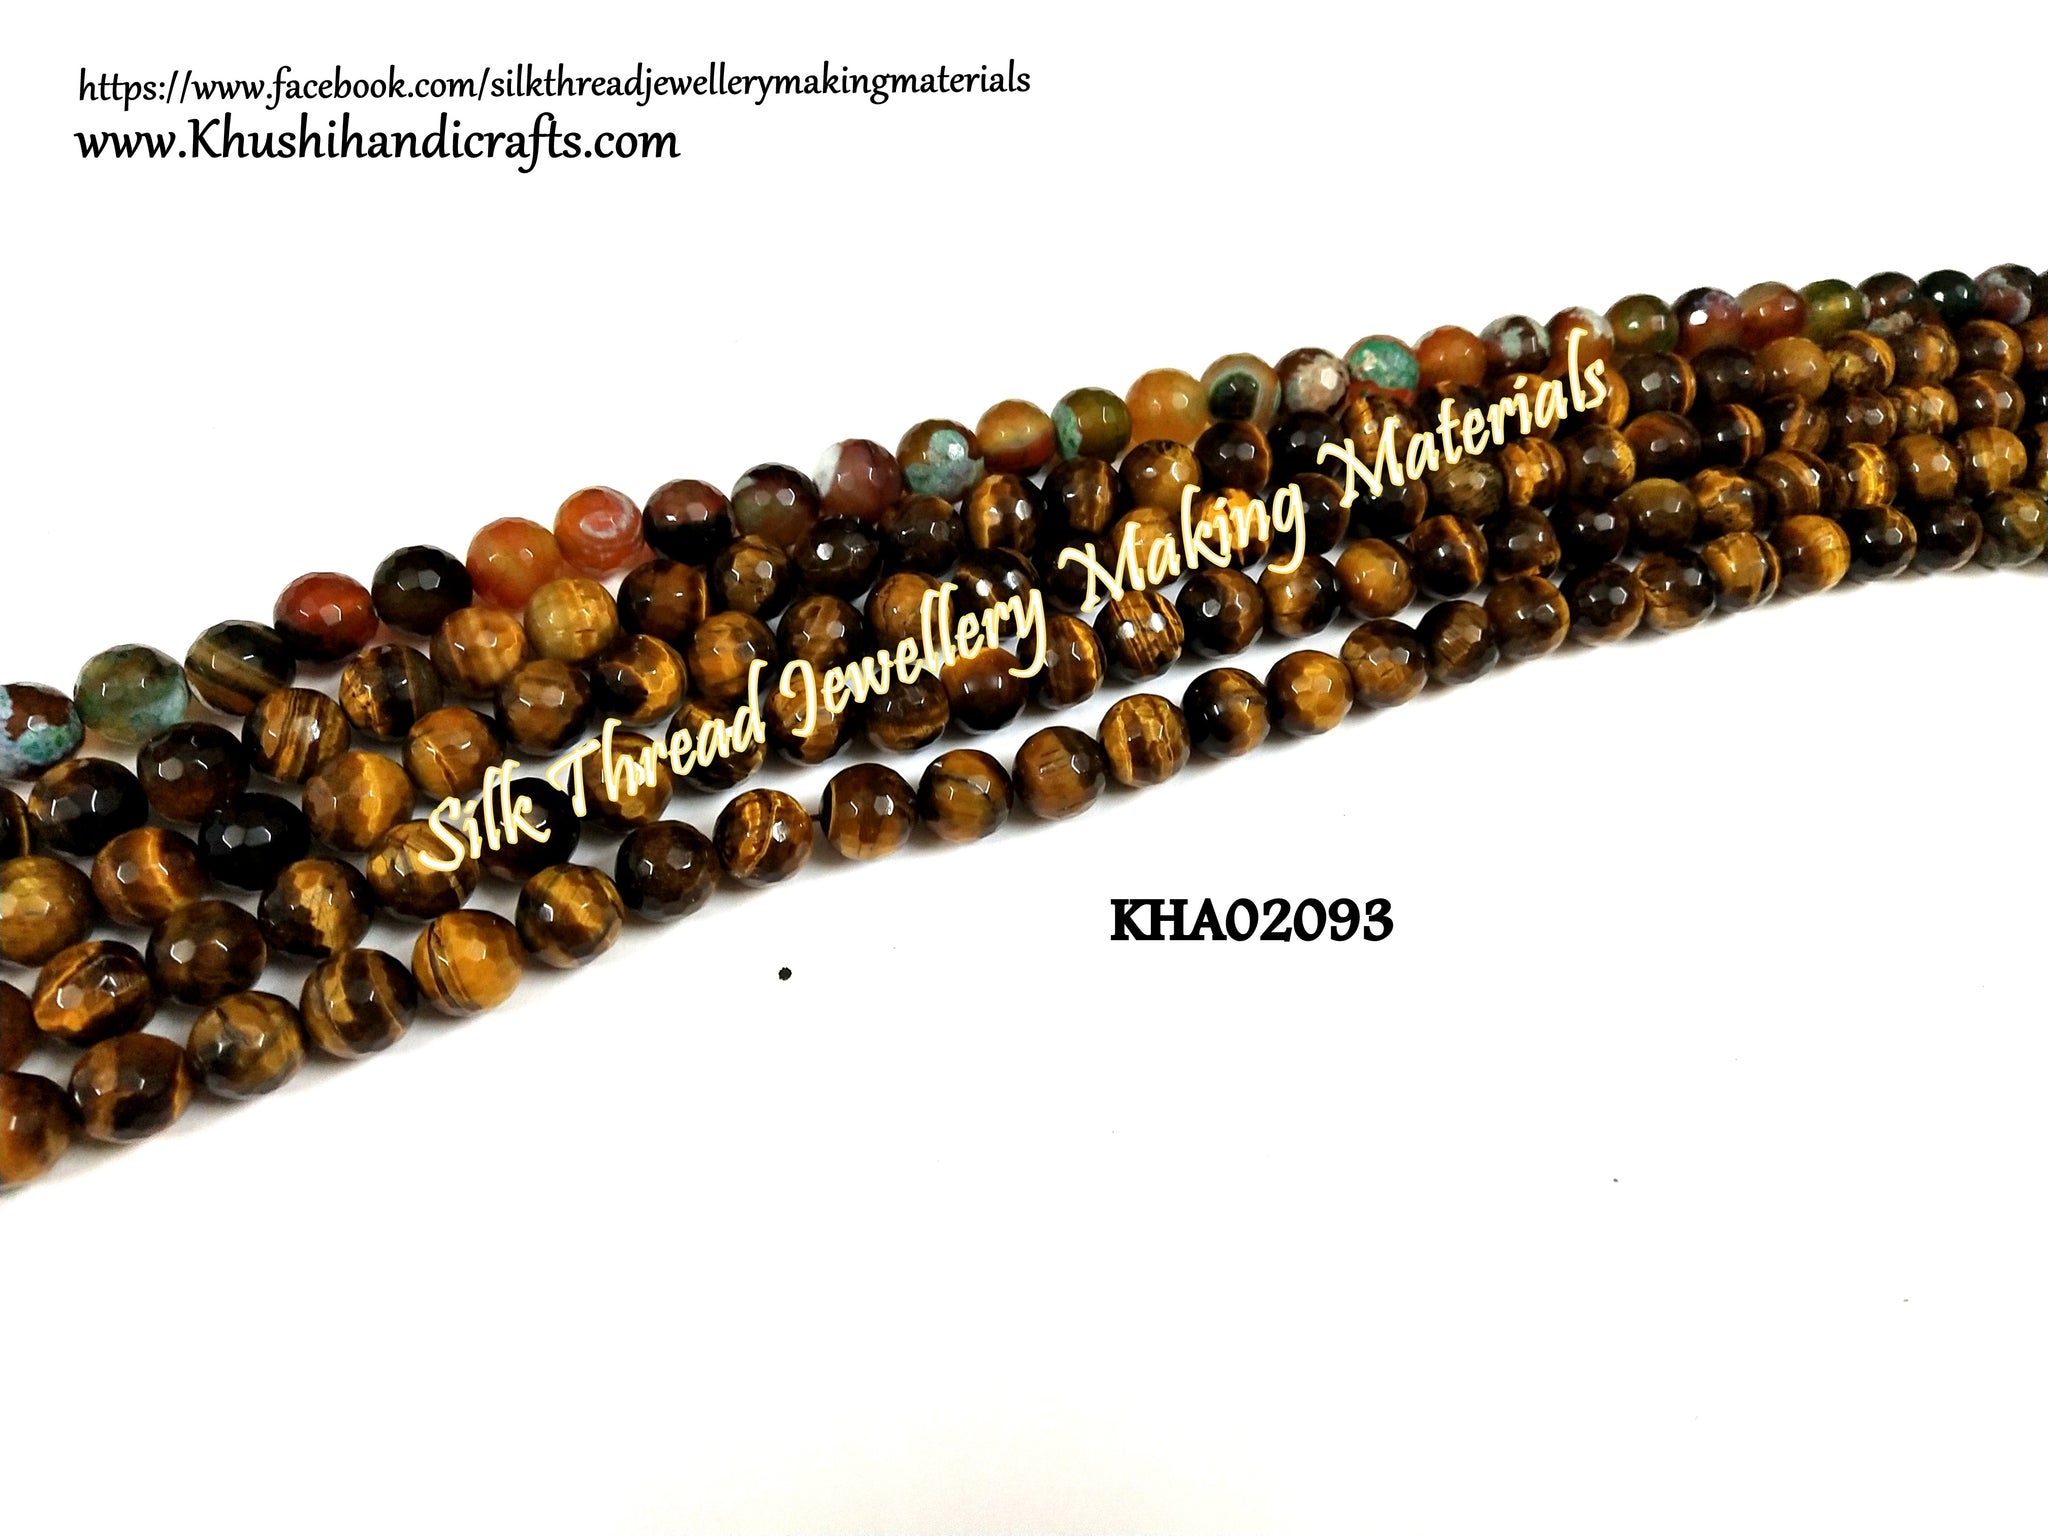 Natural Faceted Round Tiger Eye Agates - 10 mm - Gemstone Beads - KHA02093